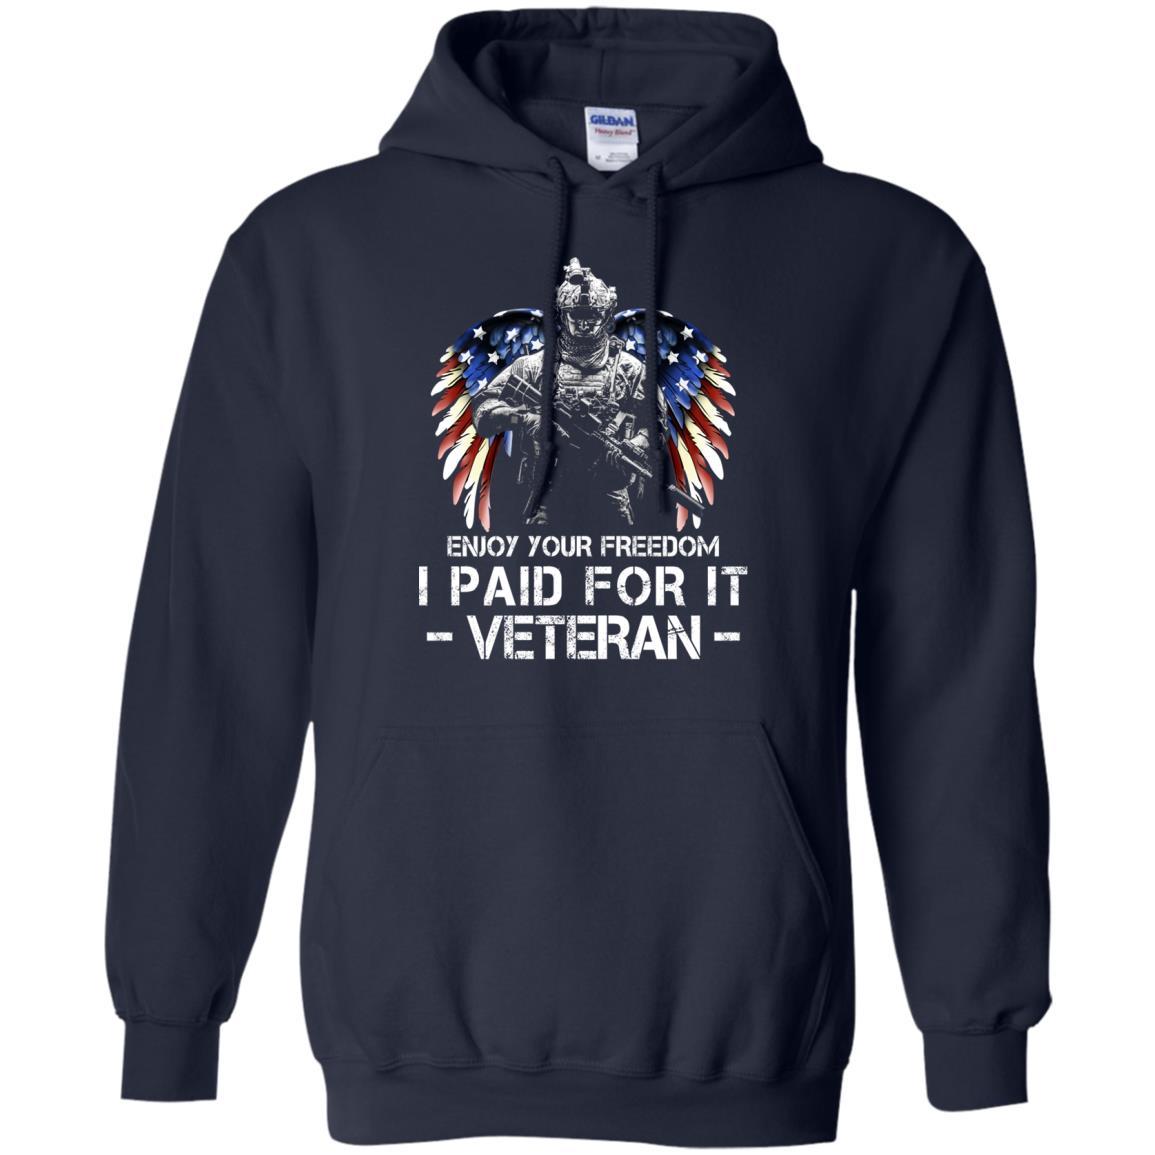 Military T-Shirt "Enjoy Your Freedom - I Paid For It Veteran Men On" Front-TShirt-General-Veterans Nation